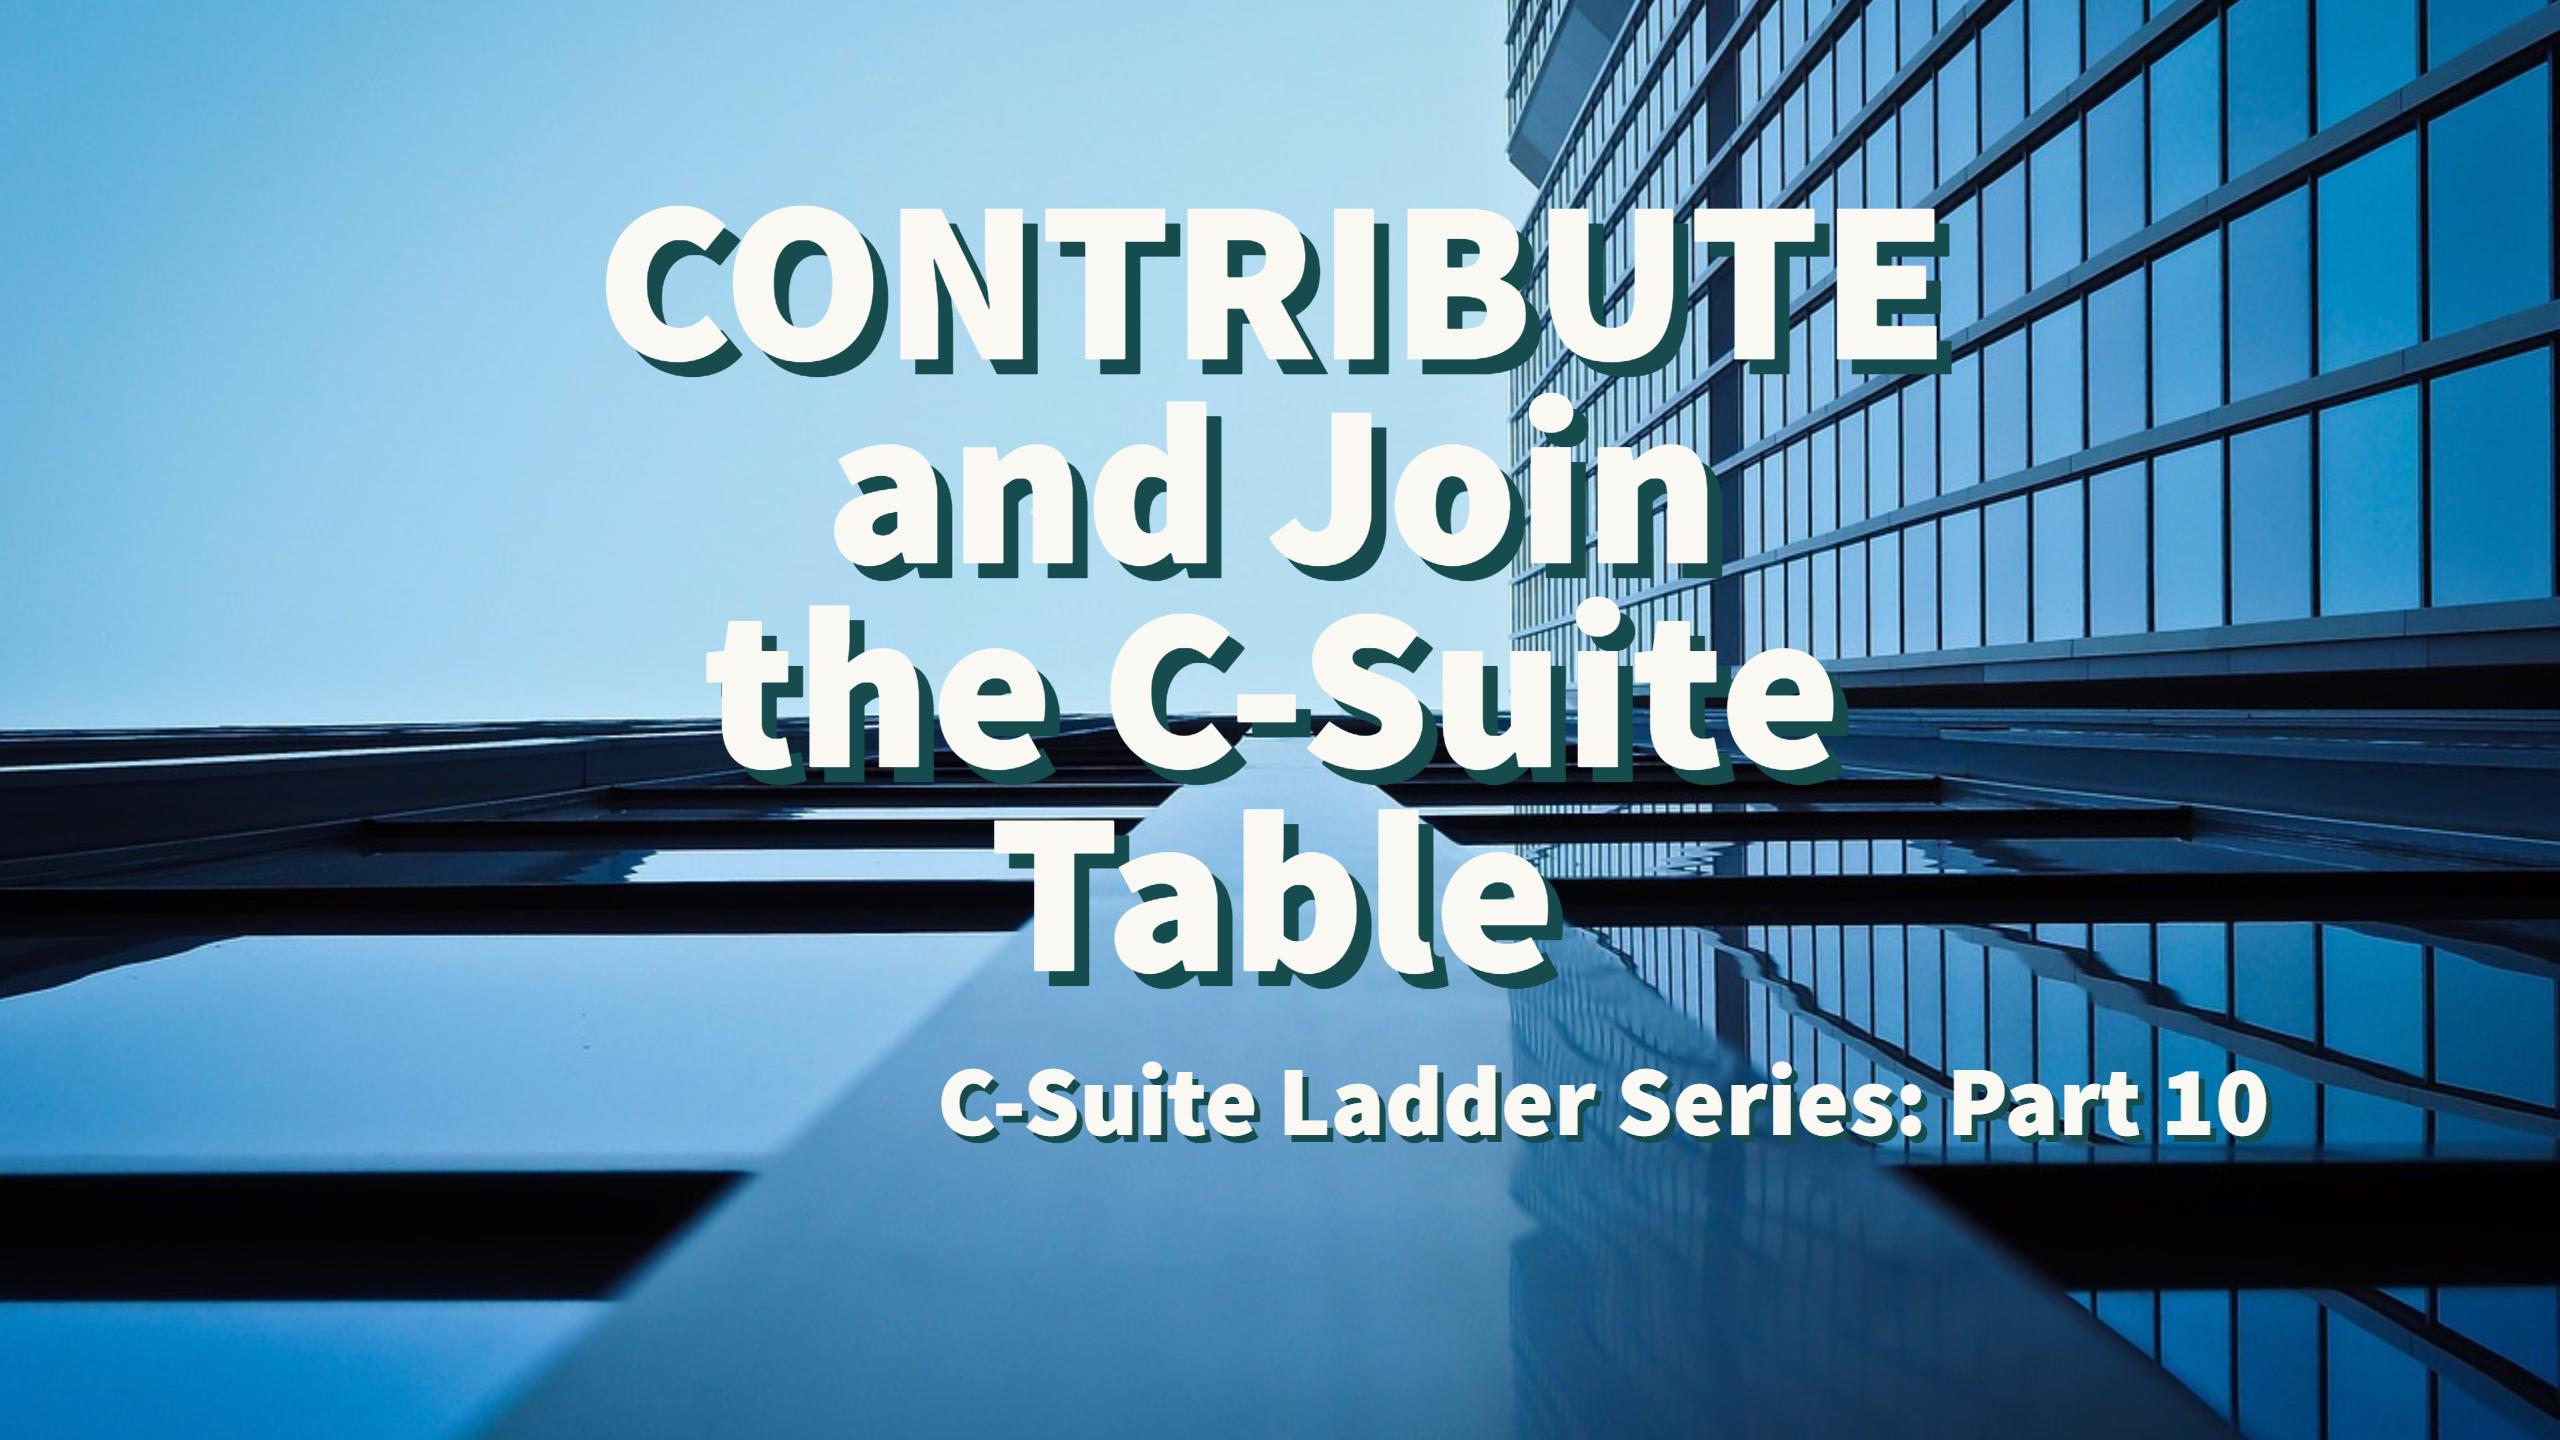 Contribute and Join the C-Suite Table